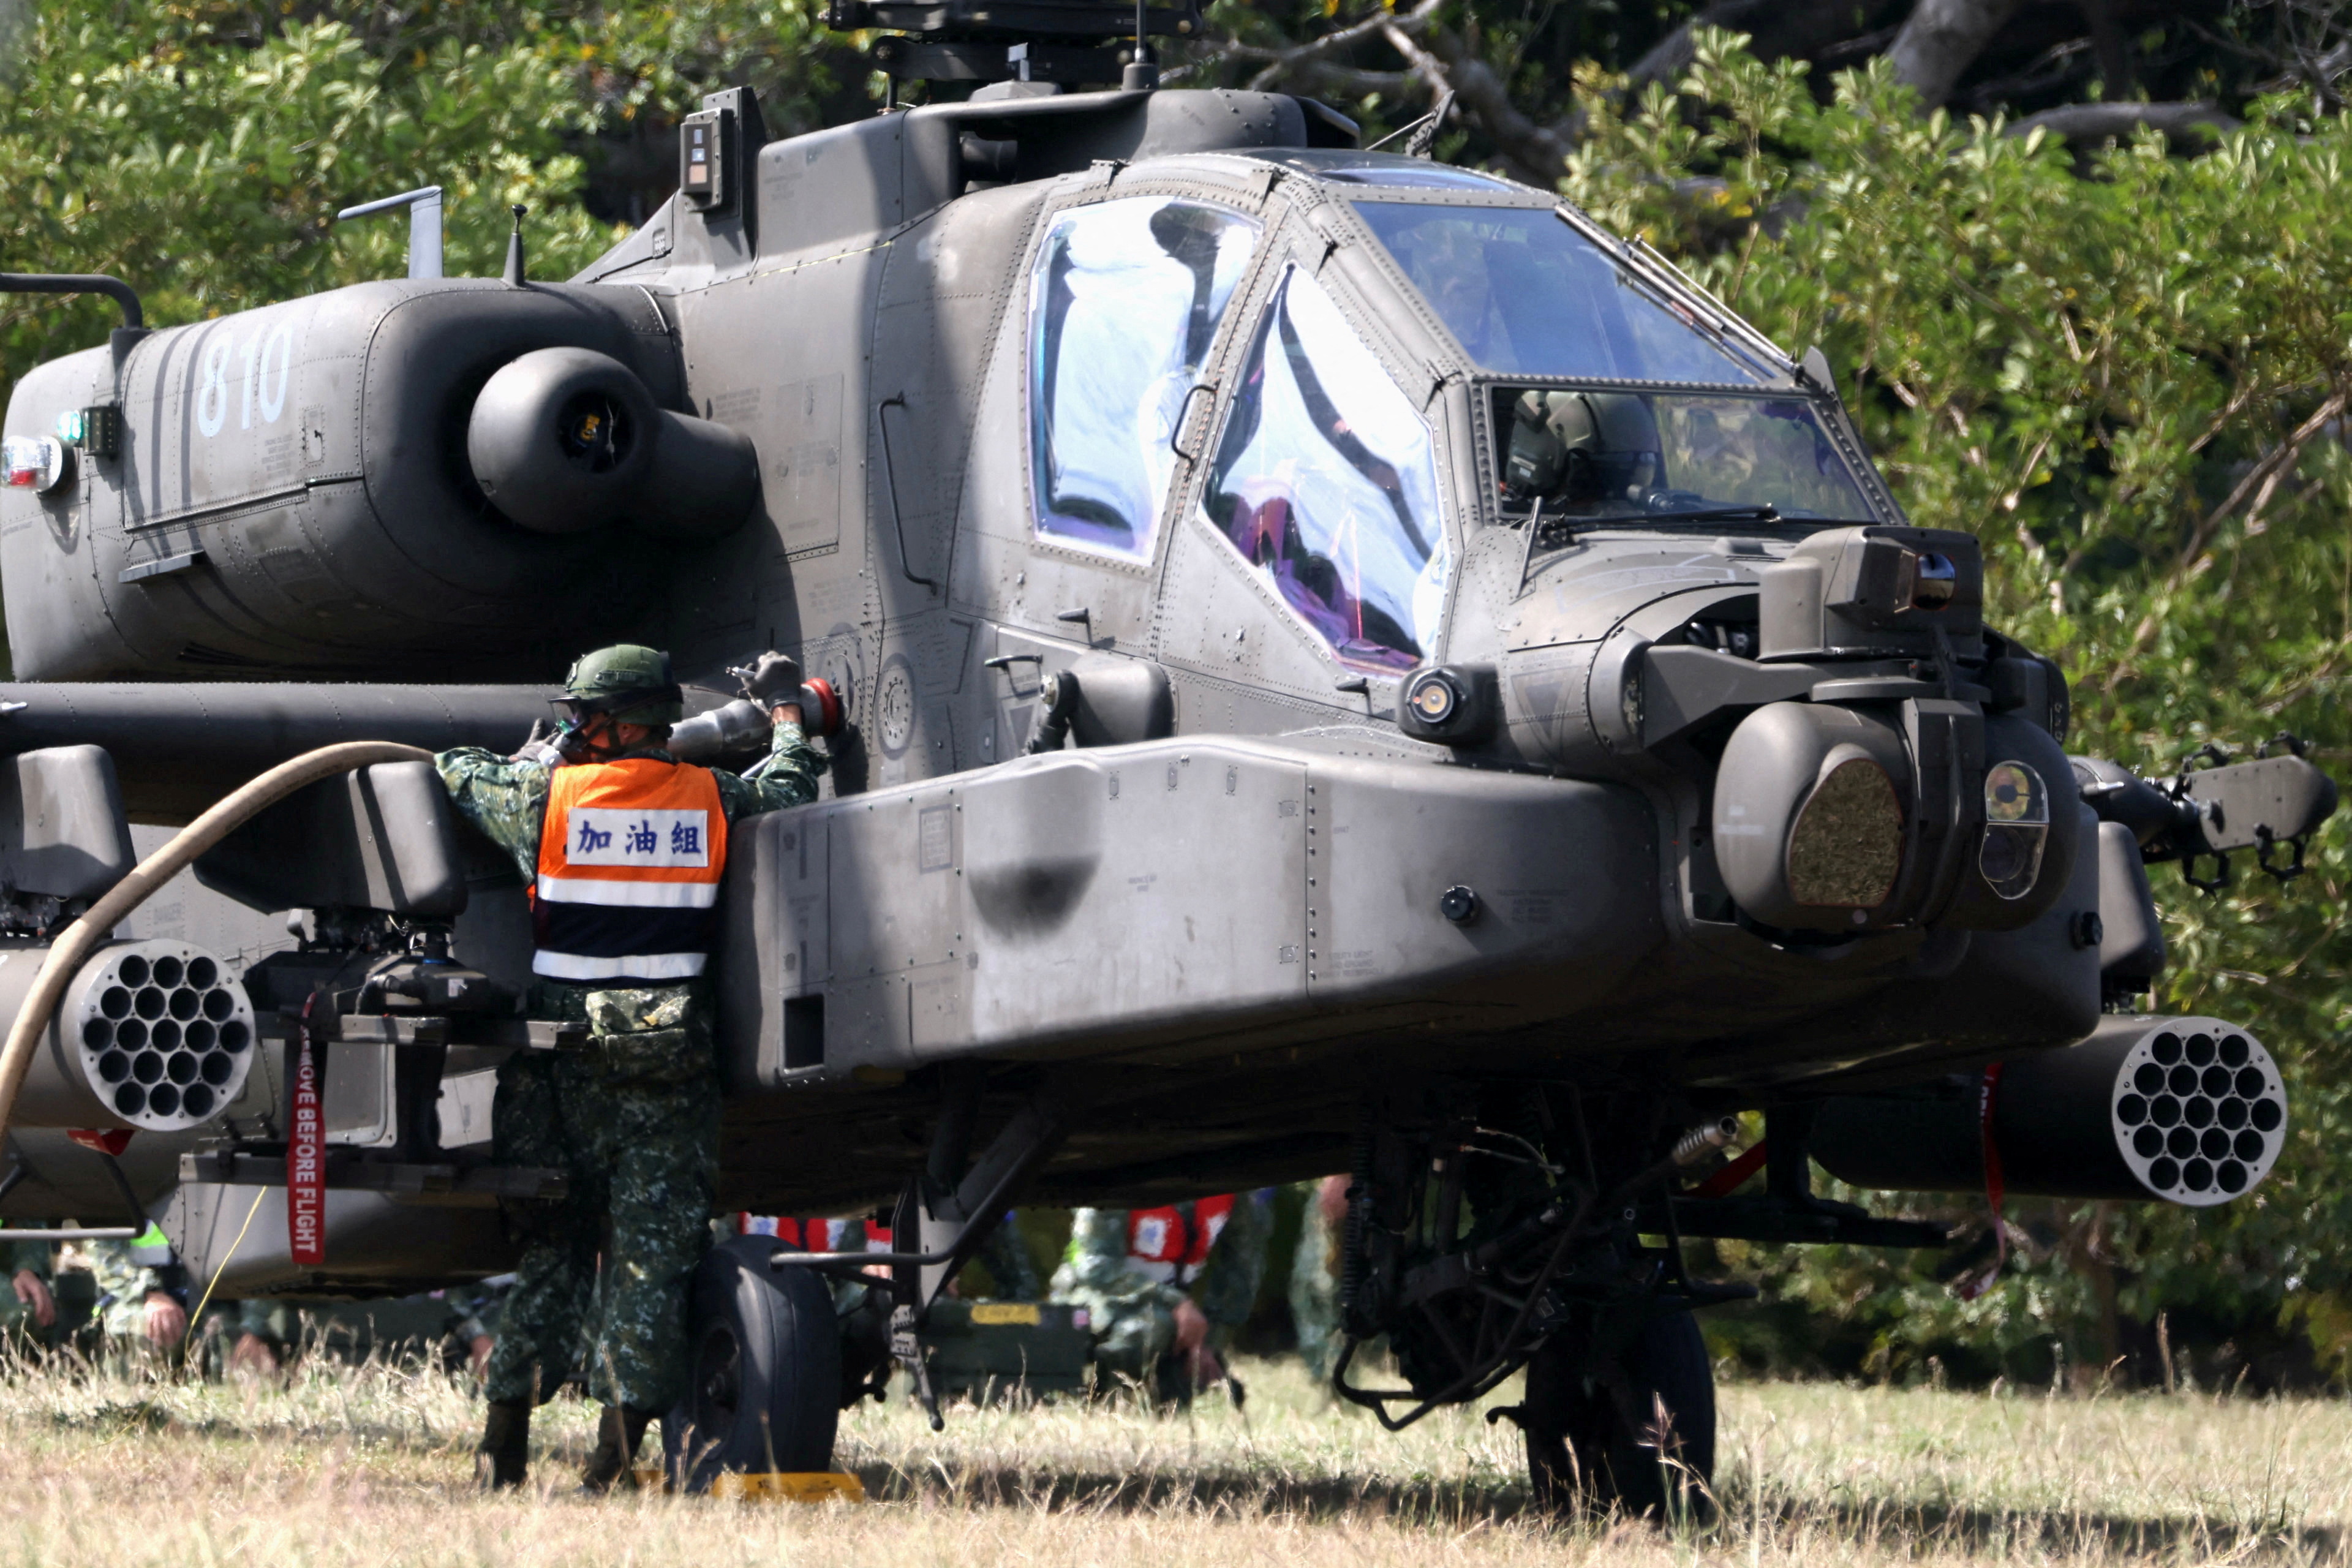 A soldier refuels an AH-64E Apache attack helicopter before take off during 'Combat Readiness Week' drills in Hsinchu